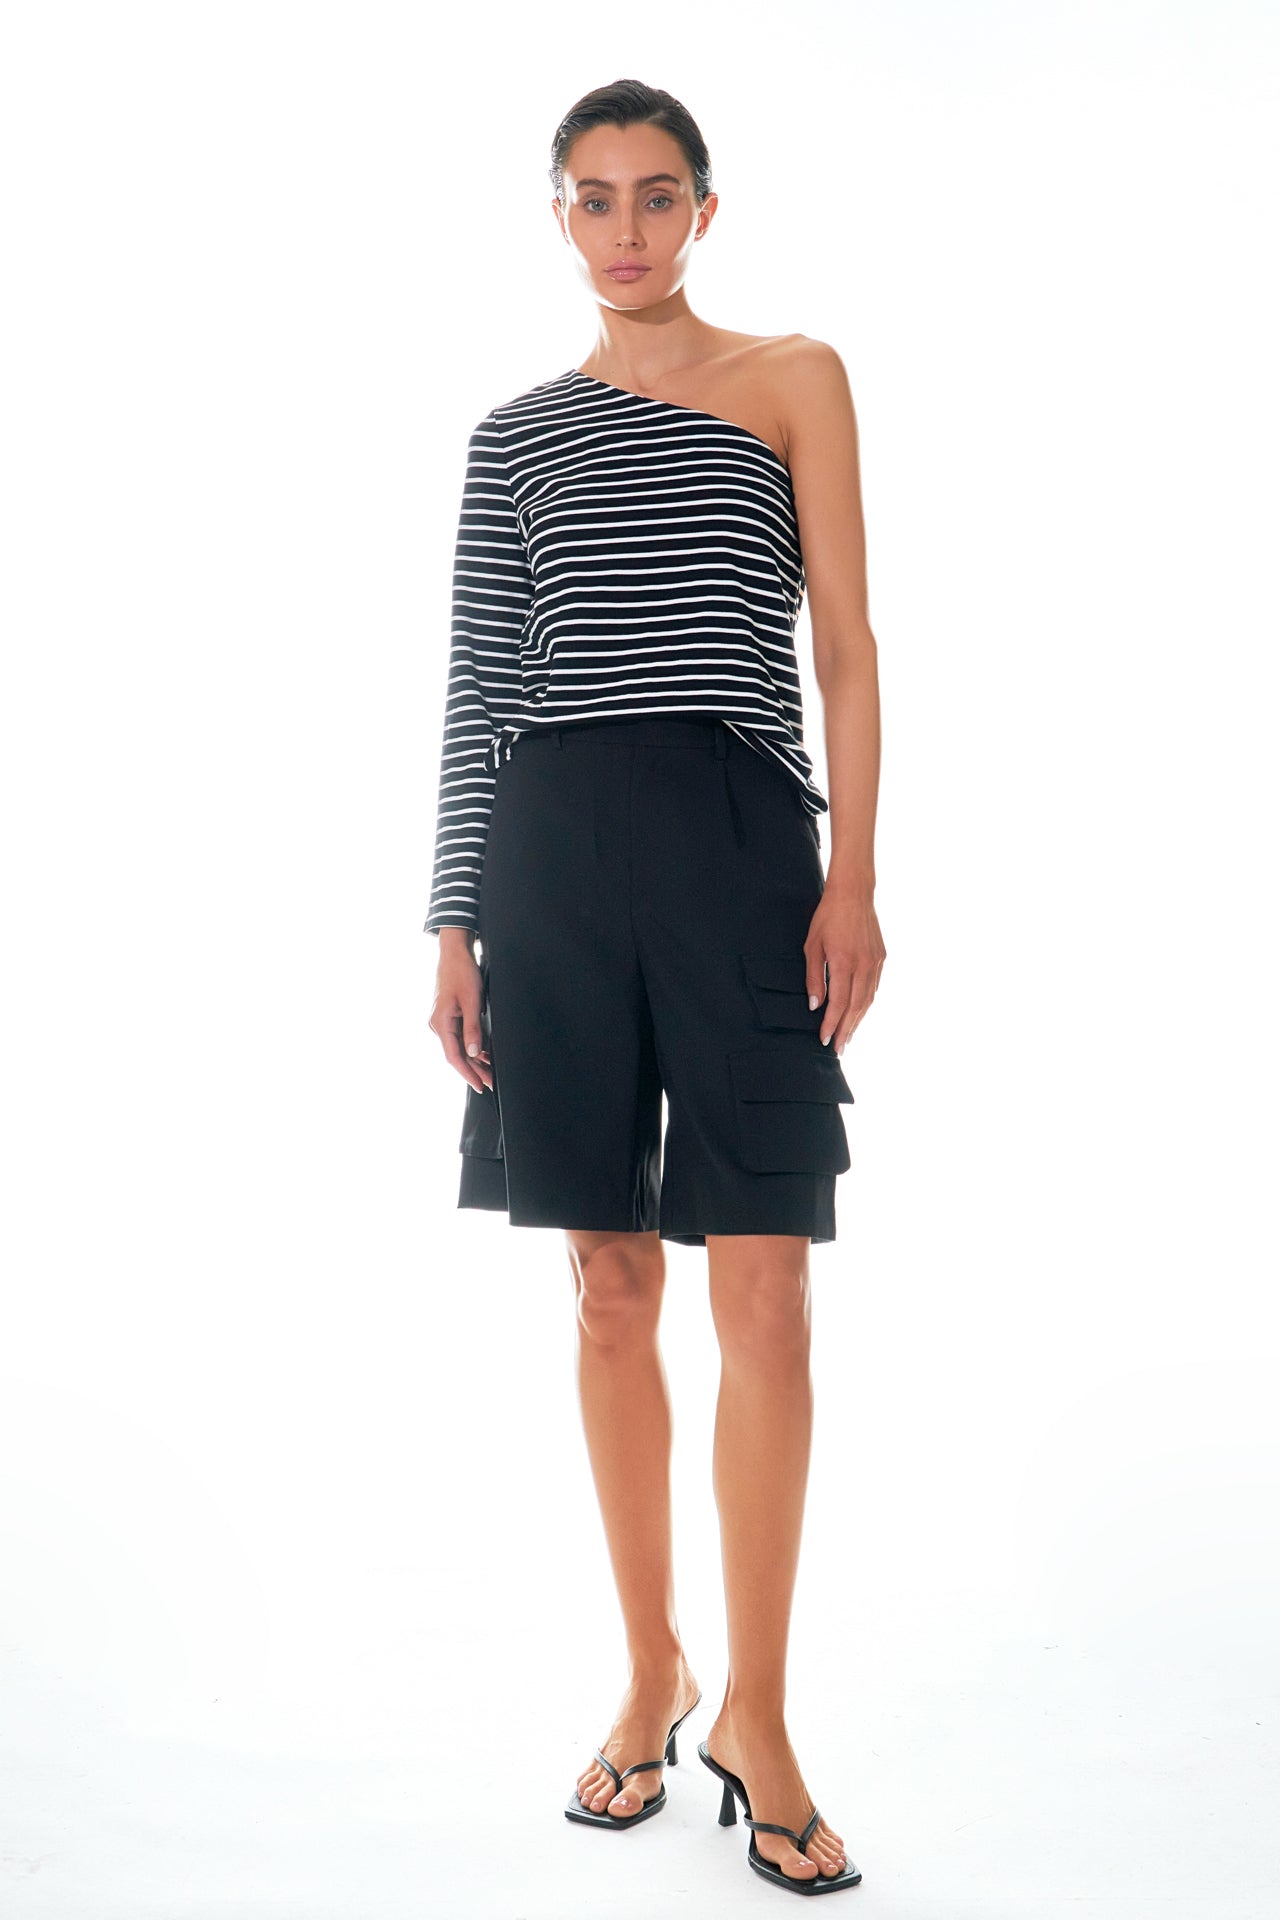 GREY LAB - Stripe One Shoulder Top - TOPS available at Objectrare